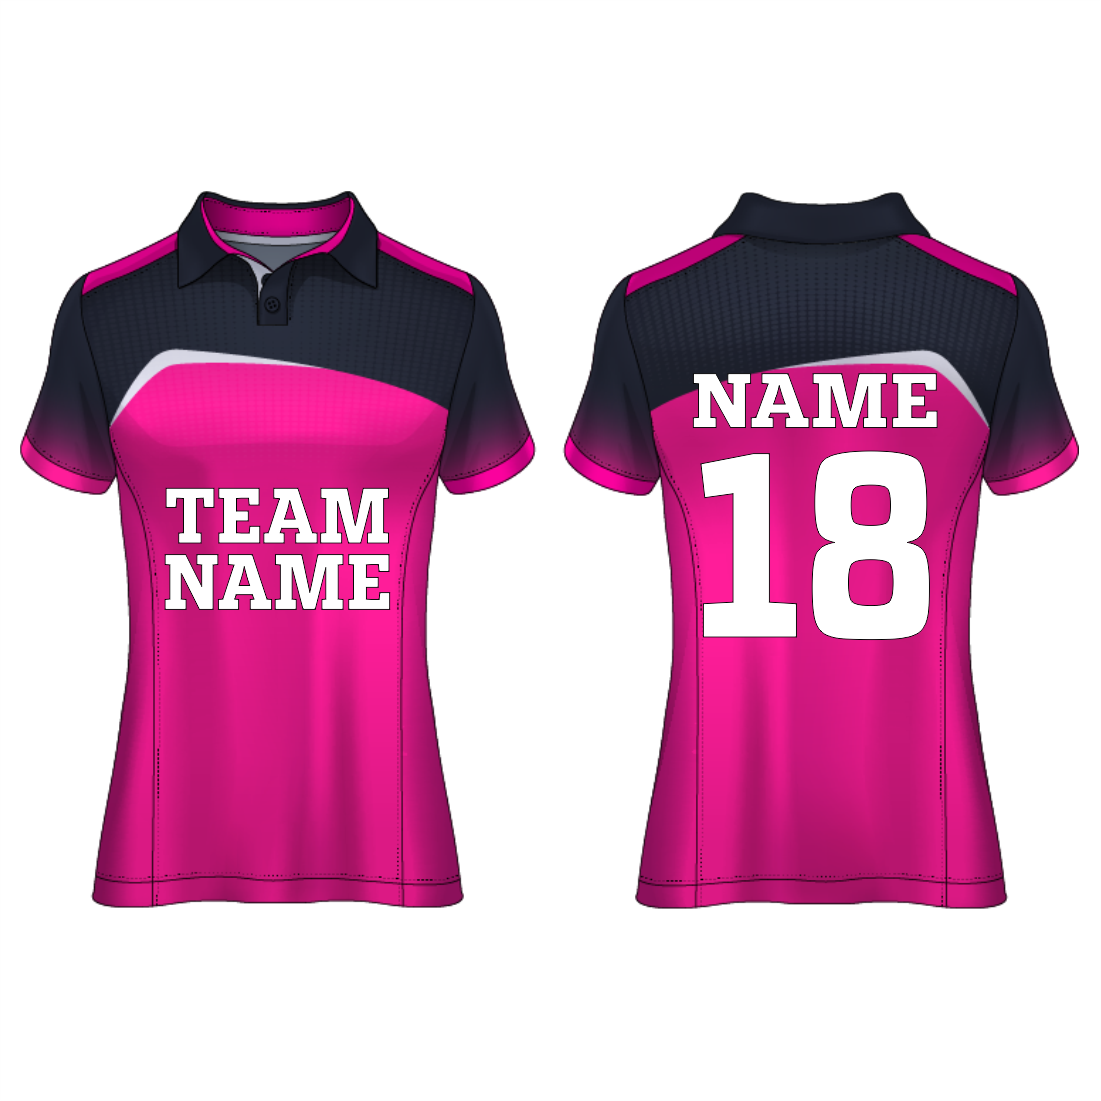 NEXT PRINT All Over Printed Customized Sublimation T-Shirt Unisex Sports Jersey Player Name & Number, Team Name.1331377742